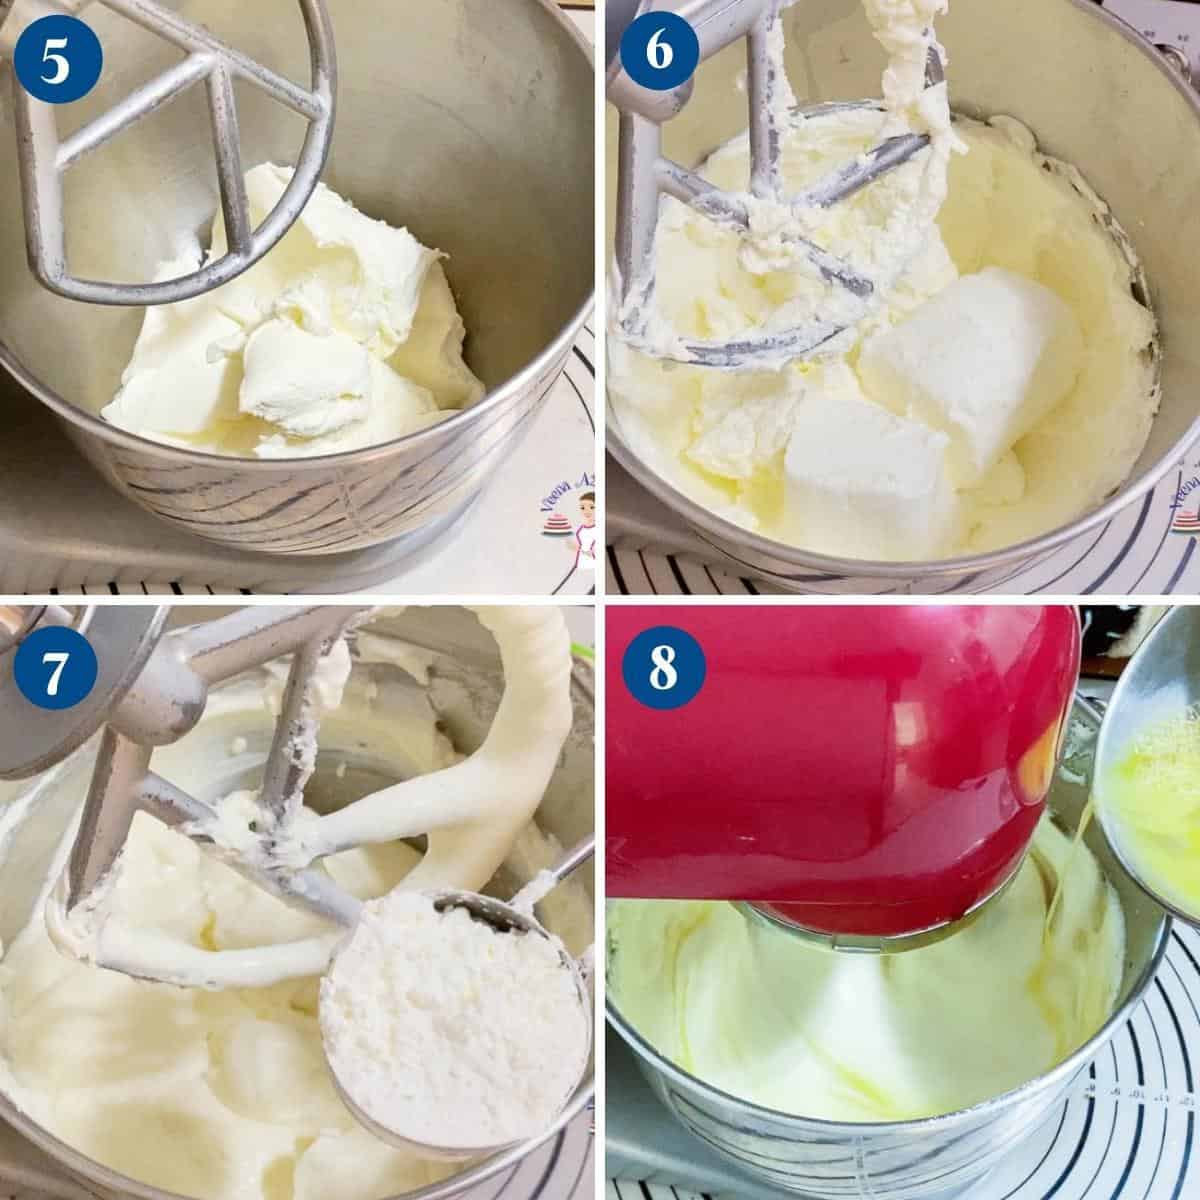 Progress pictures collage making cheesecake batter.